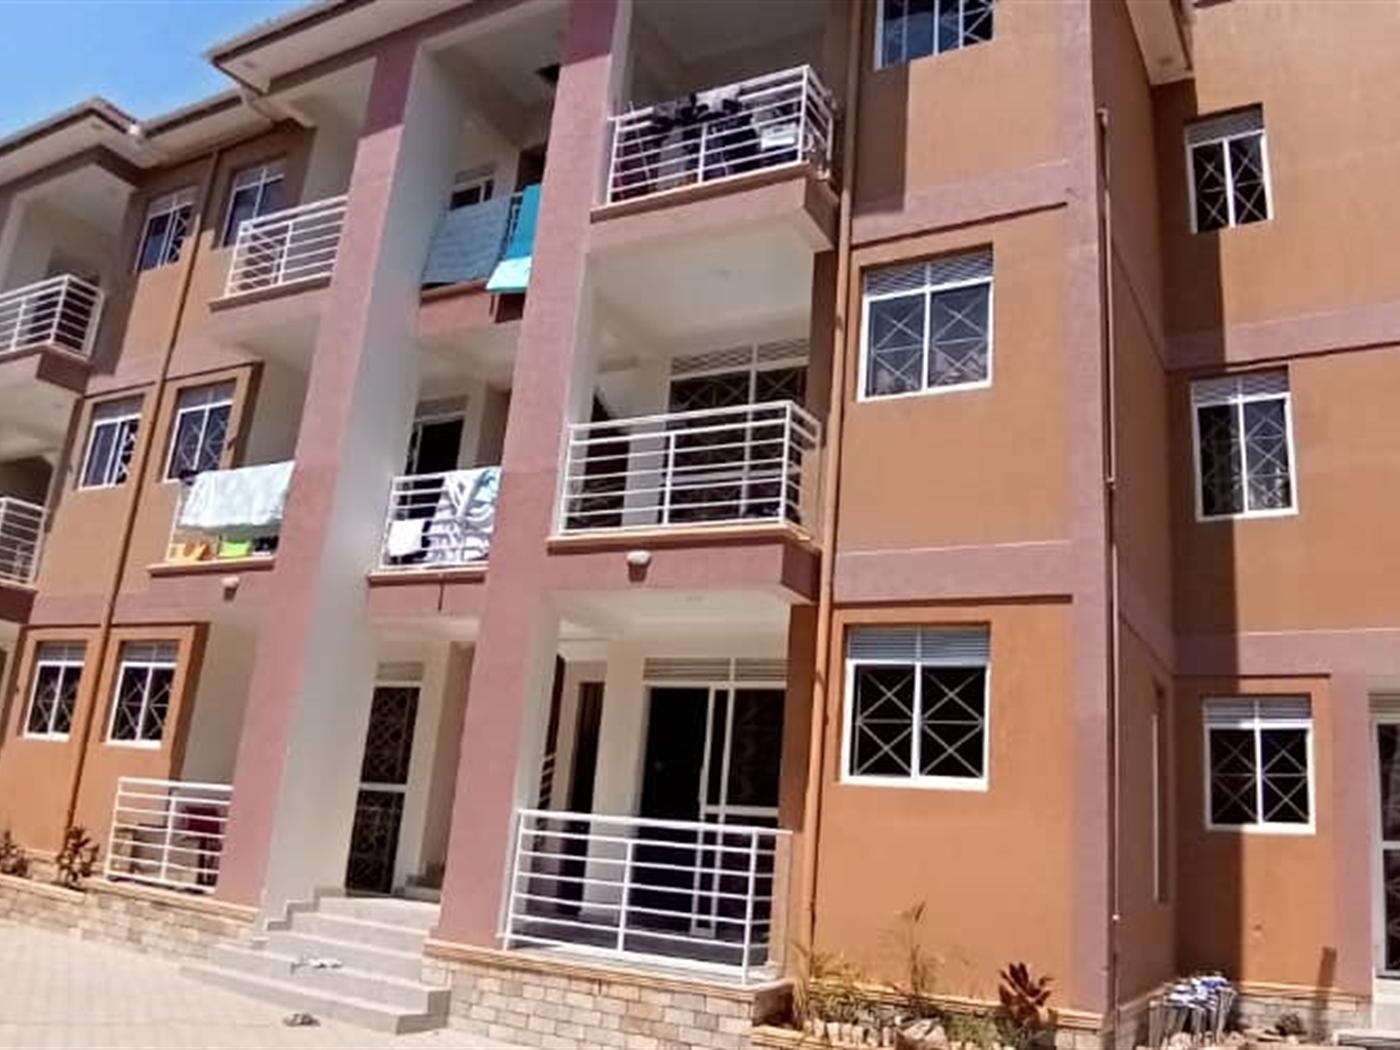 Apartment block for sale in Mbuya Wakiso